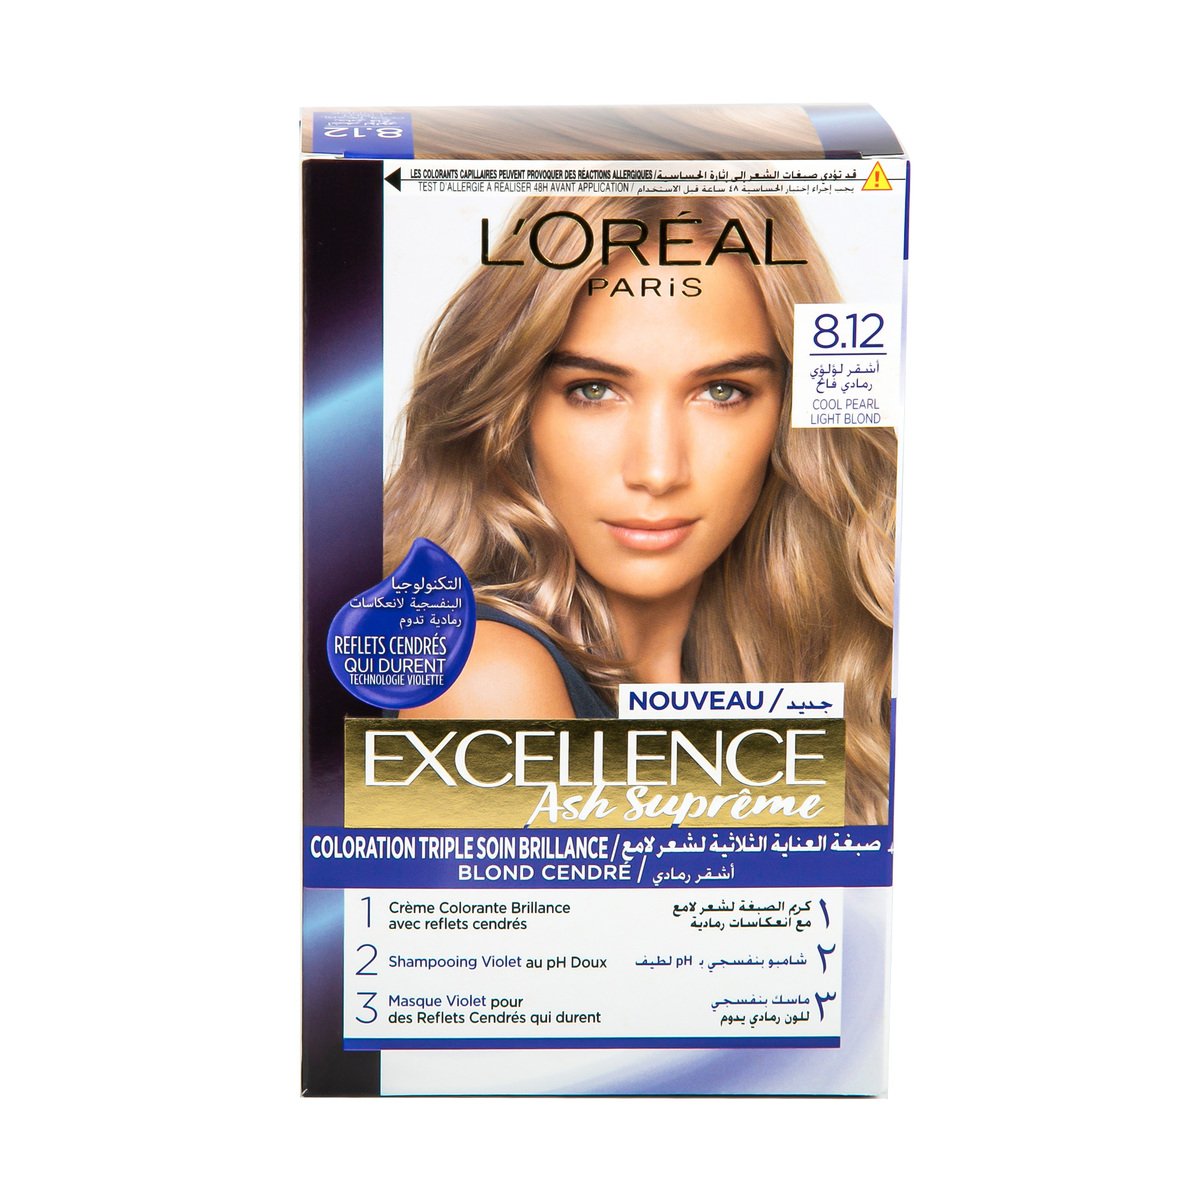 L'Oreal Paris Excellence 8.12 Cool Pearl Light Blond 1 pkt